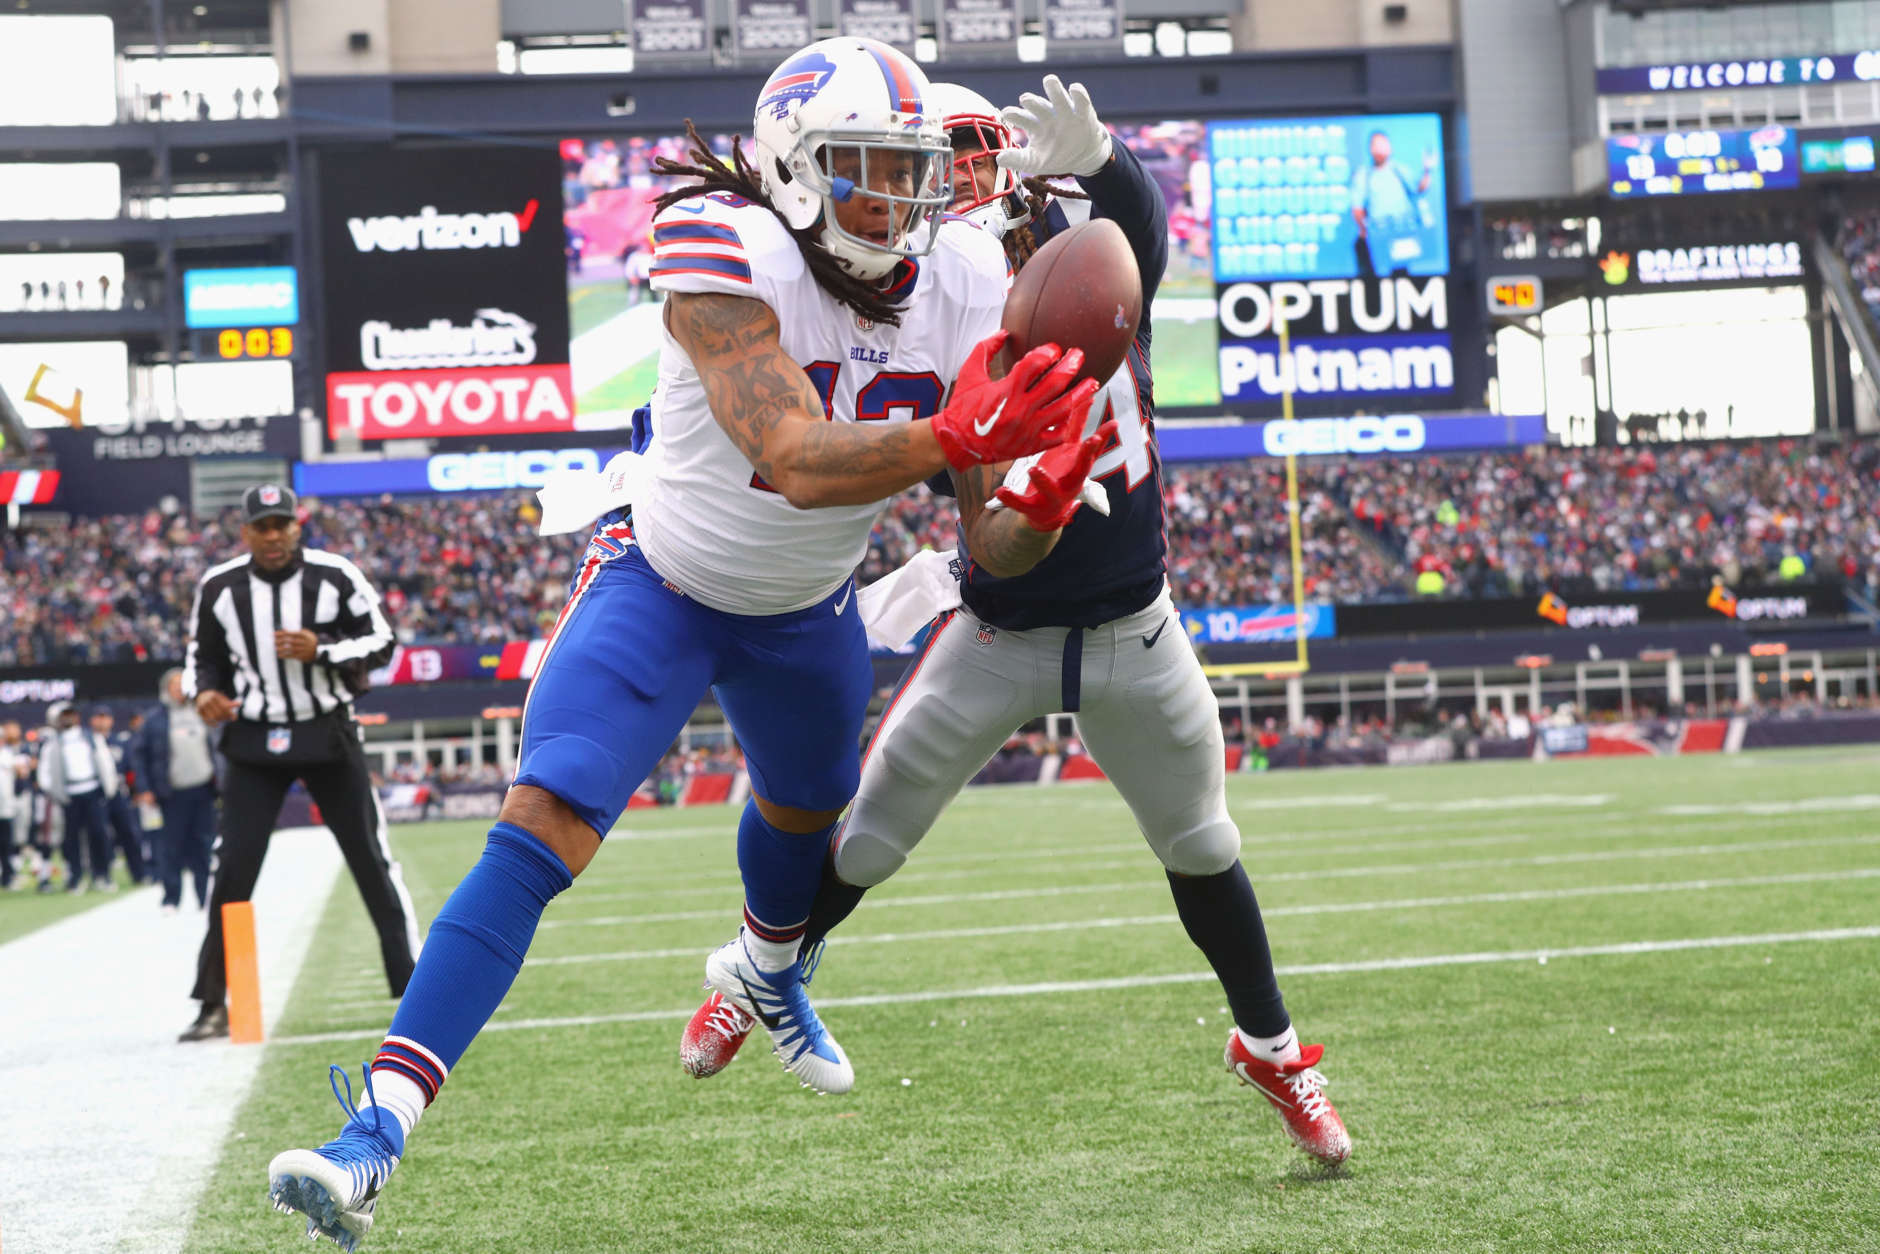 FOXBORO, MA - DECEMBER 24:  Kelvin Benjamin #13 of the Buffalo Bills catches a touchdown pass as he is defended by Stephon Gilmore #24 of the New England Patriots during the quarter of a game against the Buffalo Bills at Gillette Stadium on December 24, 2017 in Foxboro, Massachusetts. The touchdown was reversed after an official review.  (Photo by Maddie Meyer/Getty Images)